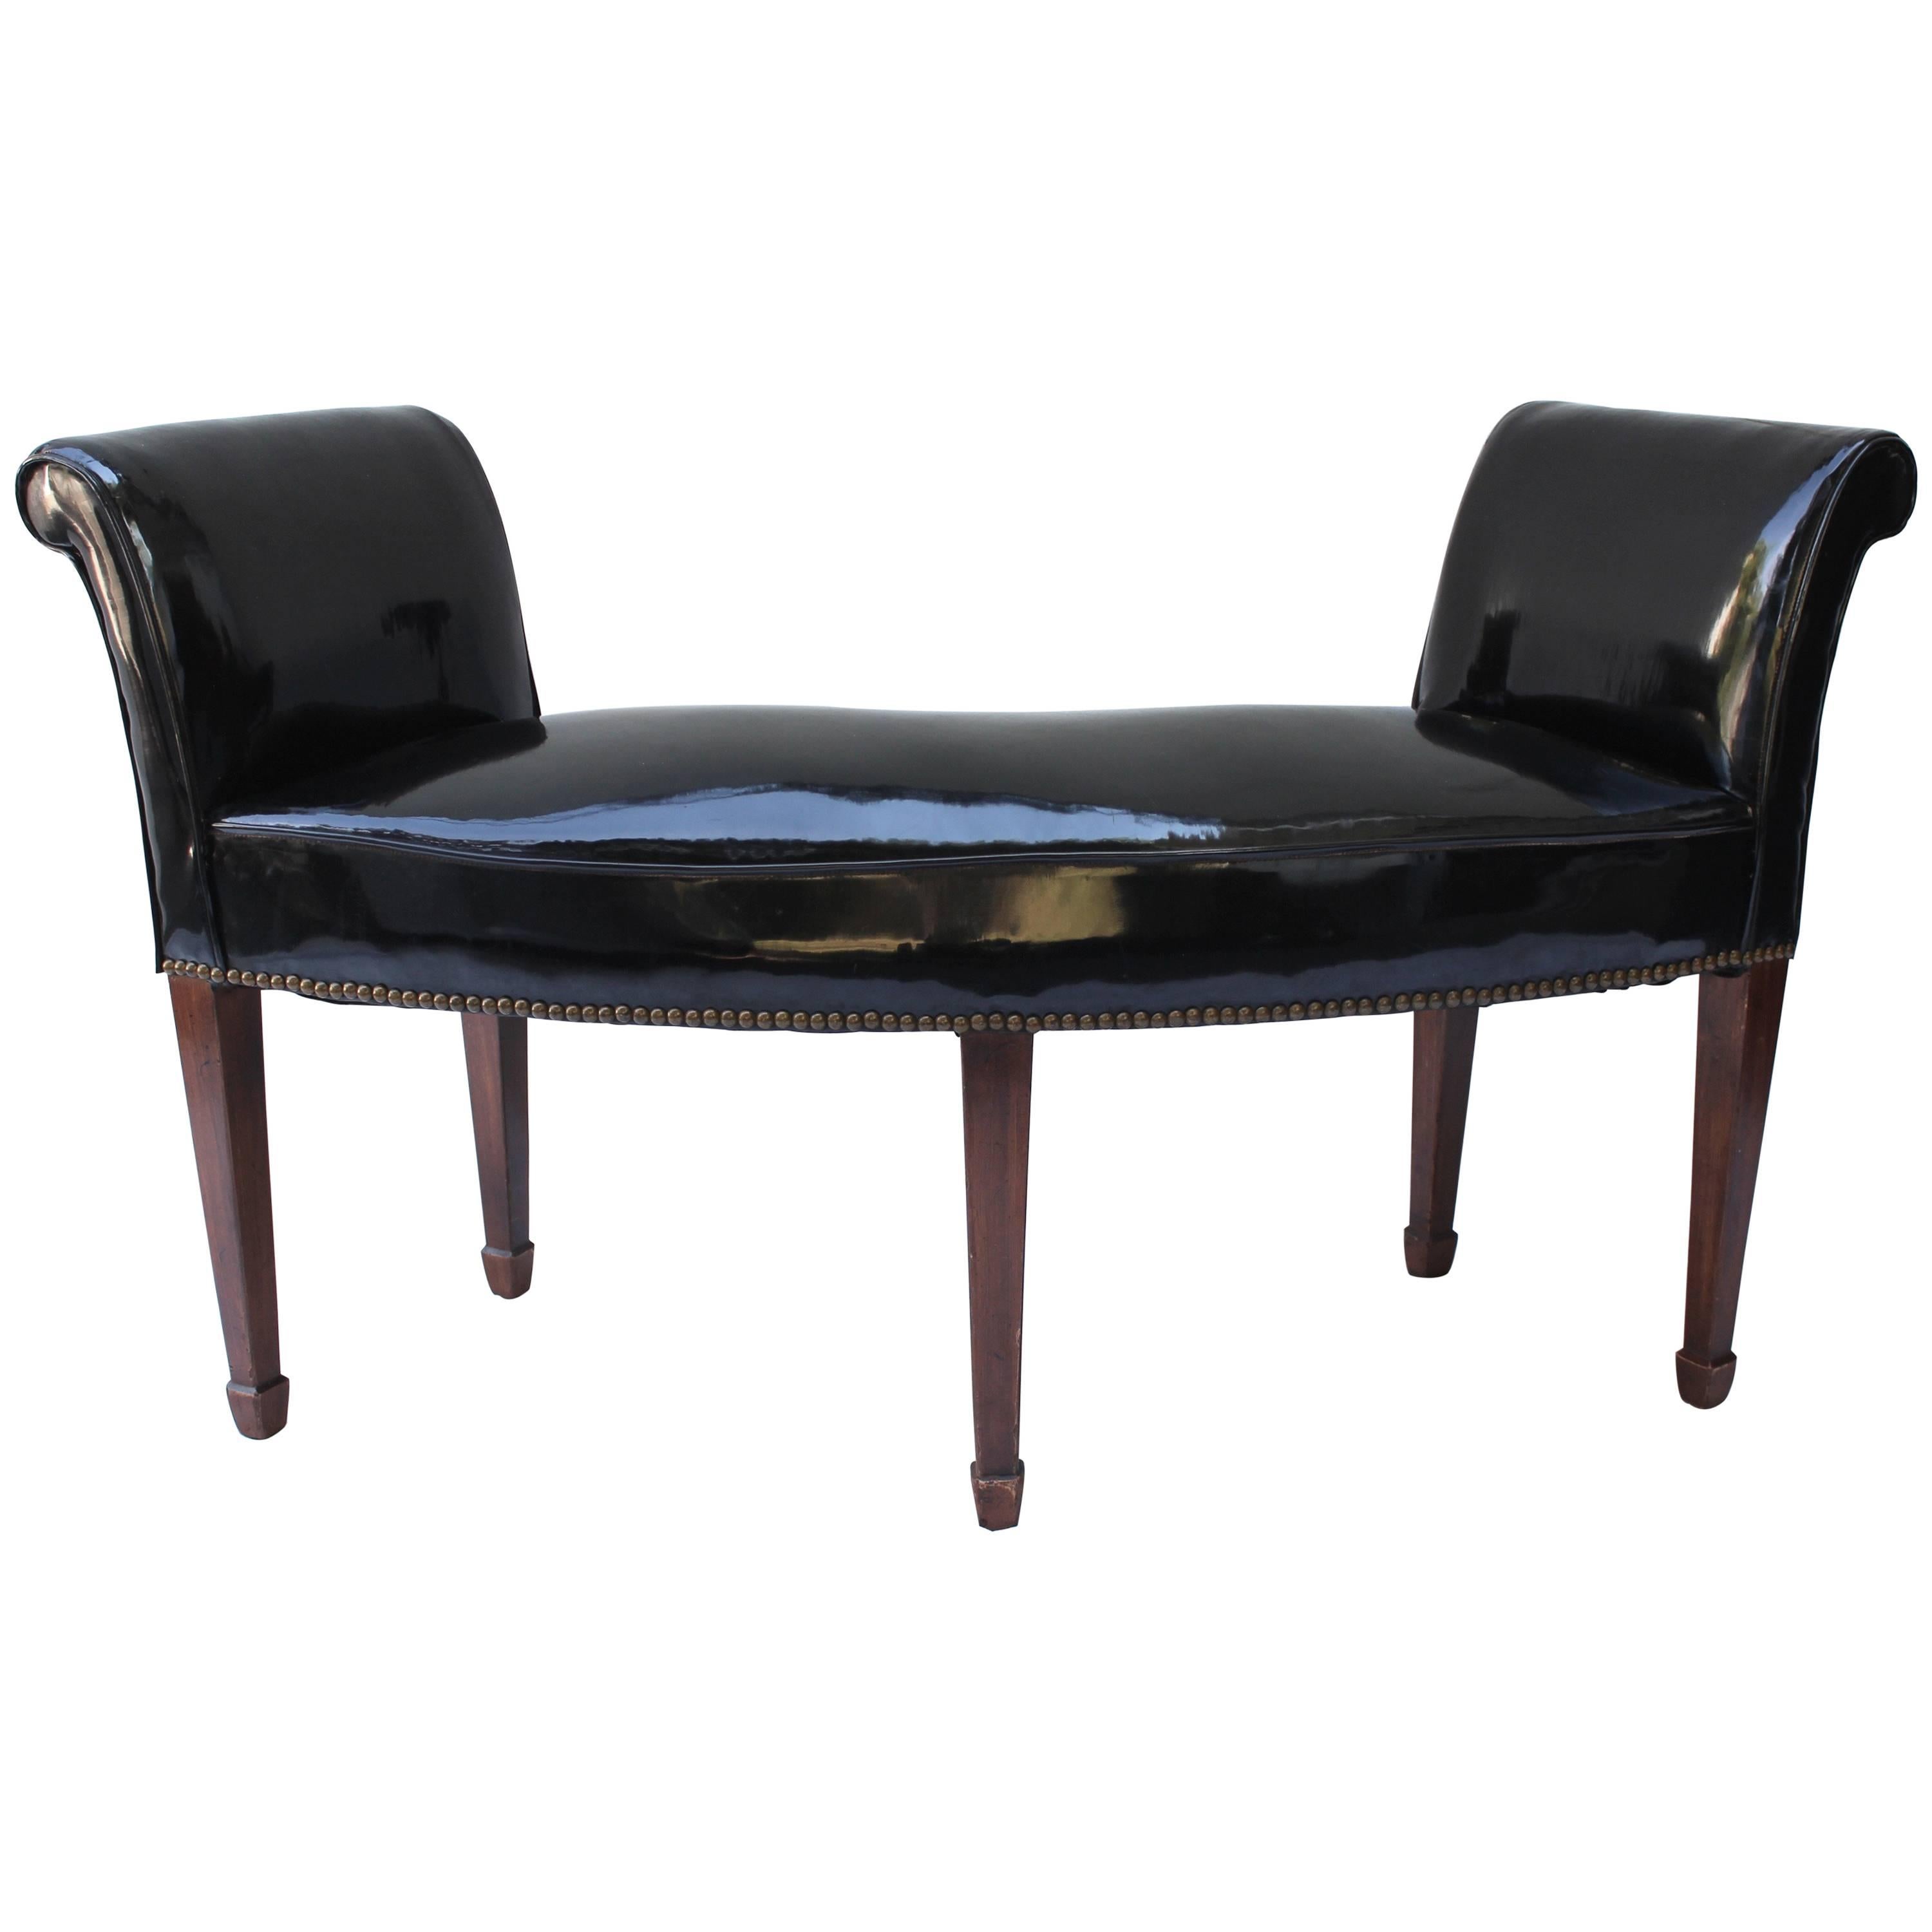 Patent Leather Curved Bench